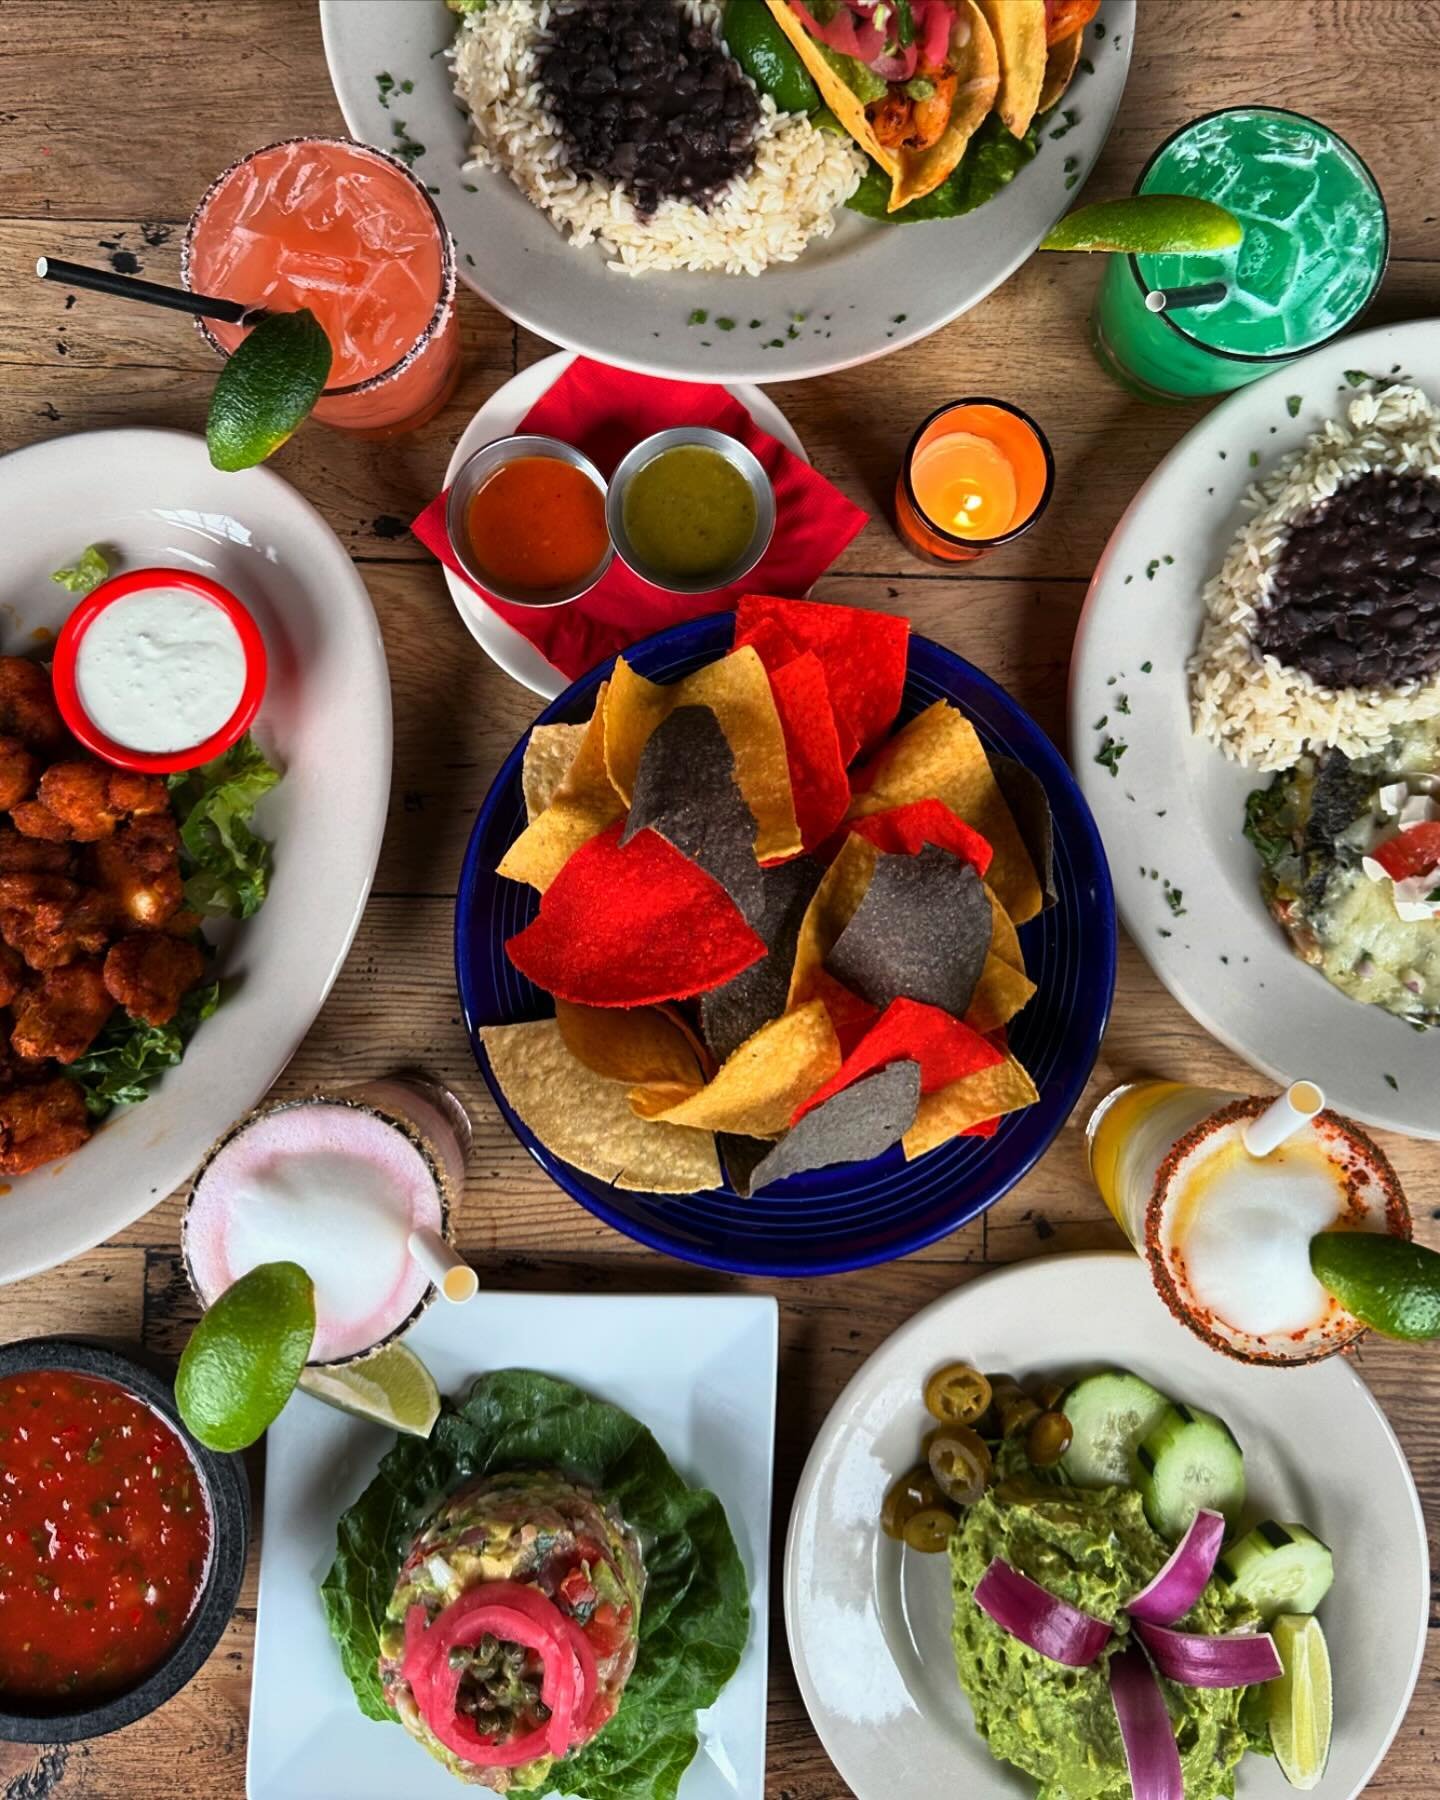 Bring out the tequila, we&rsquo;re celebrating Cinco de Mayo at Santa Fe! Sunday, May 5th all Santa Fe restaurants will be open 12:00-7:00pm to host you and your guests for a festive gathering with some delicious special additions to our regular menu